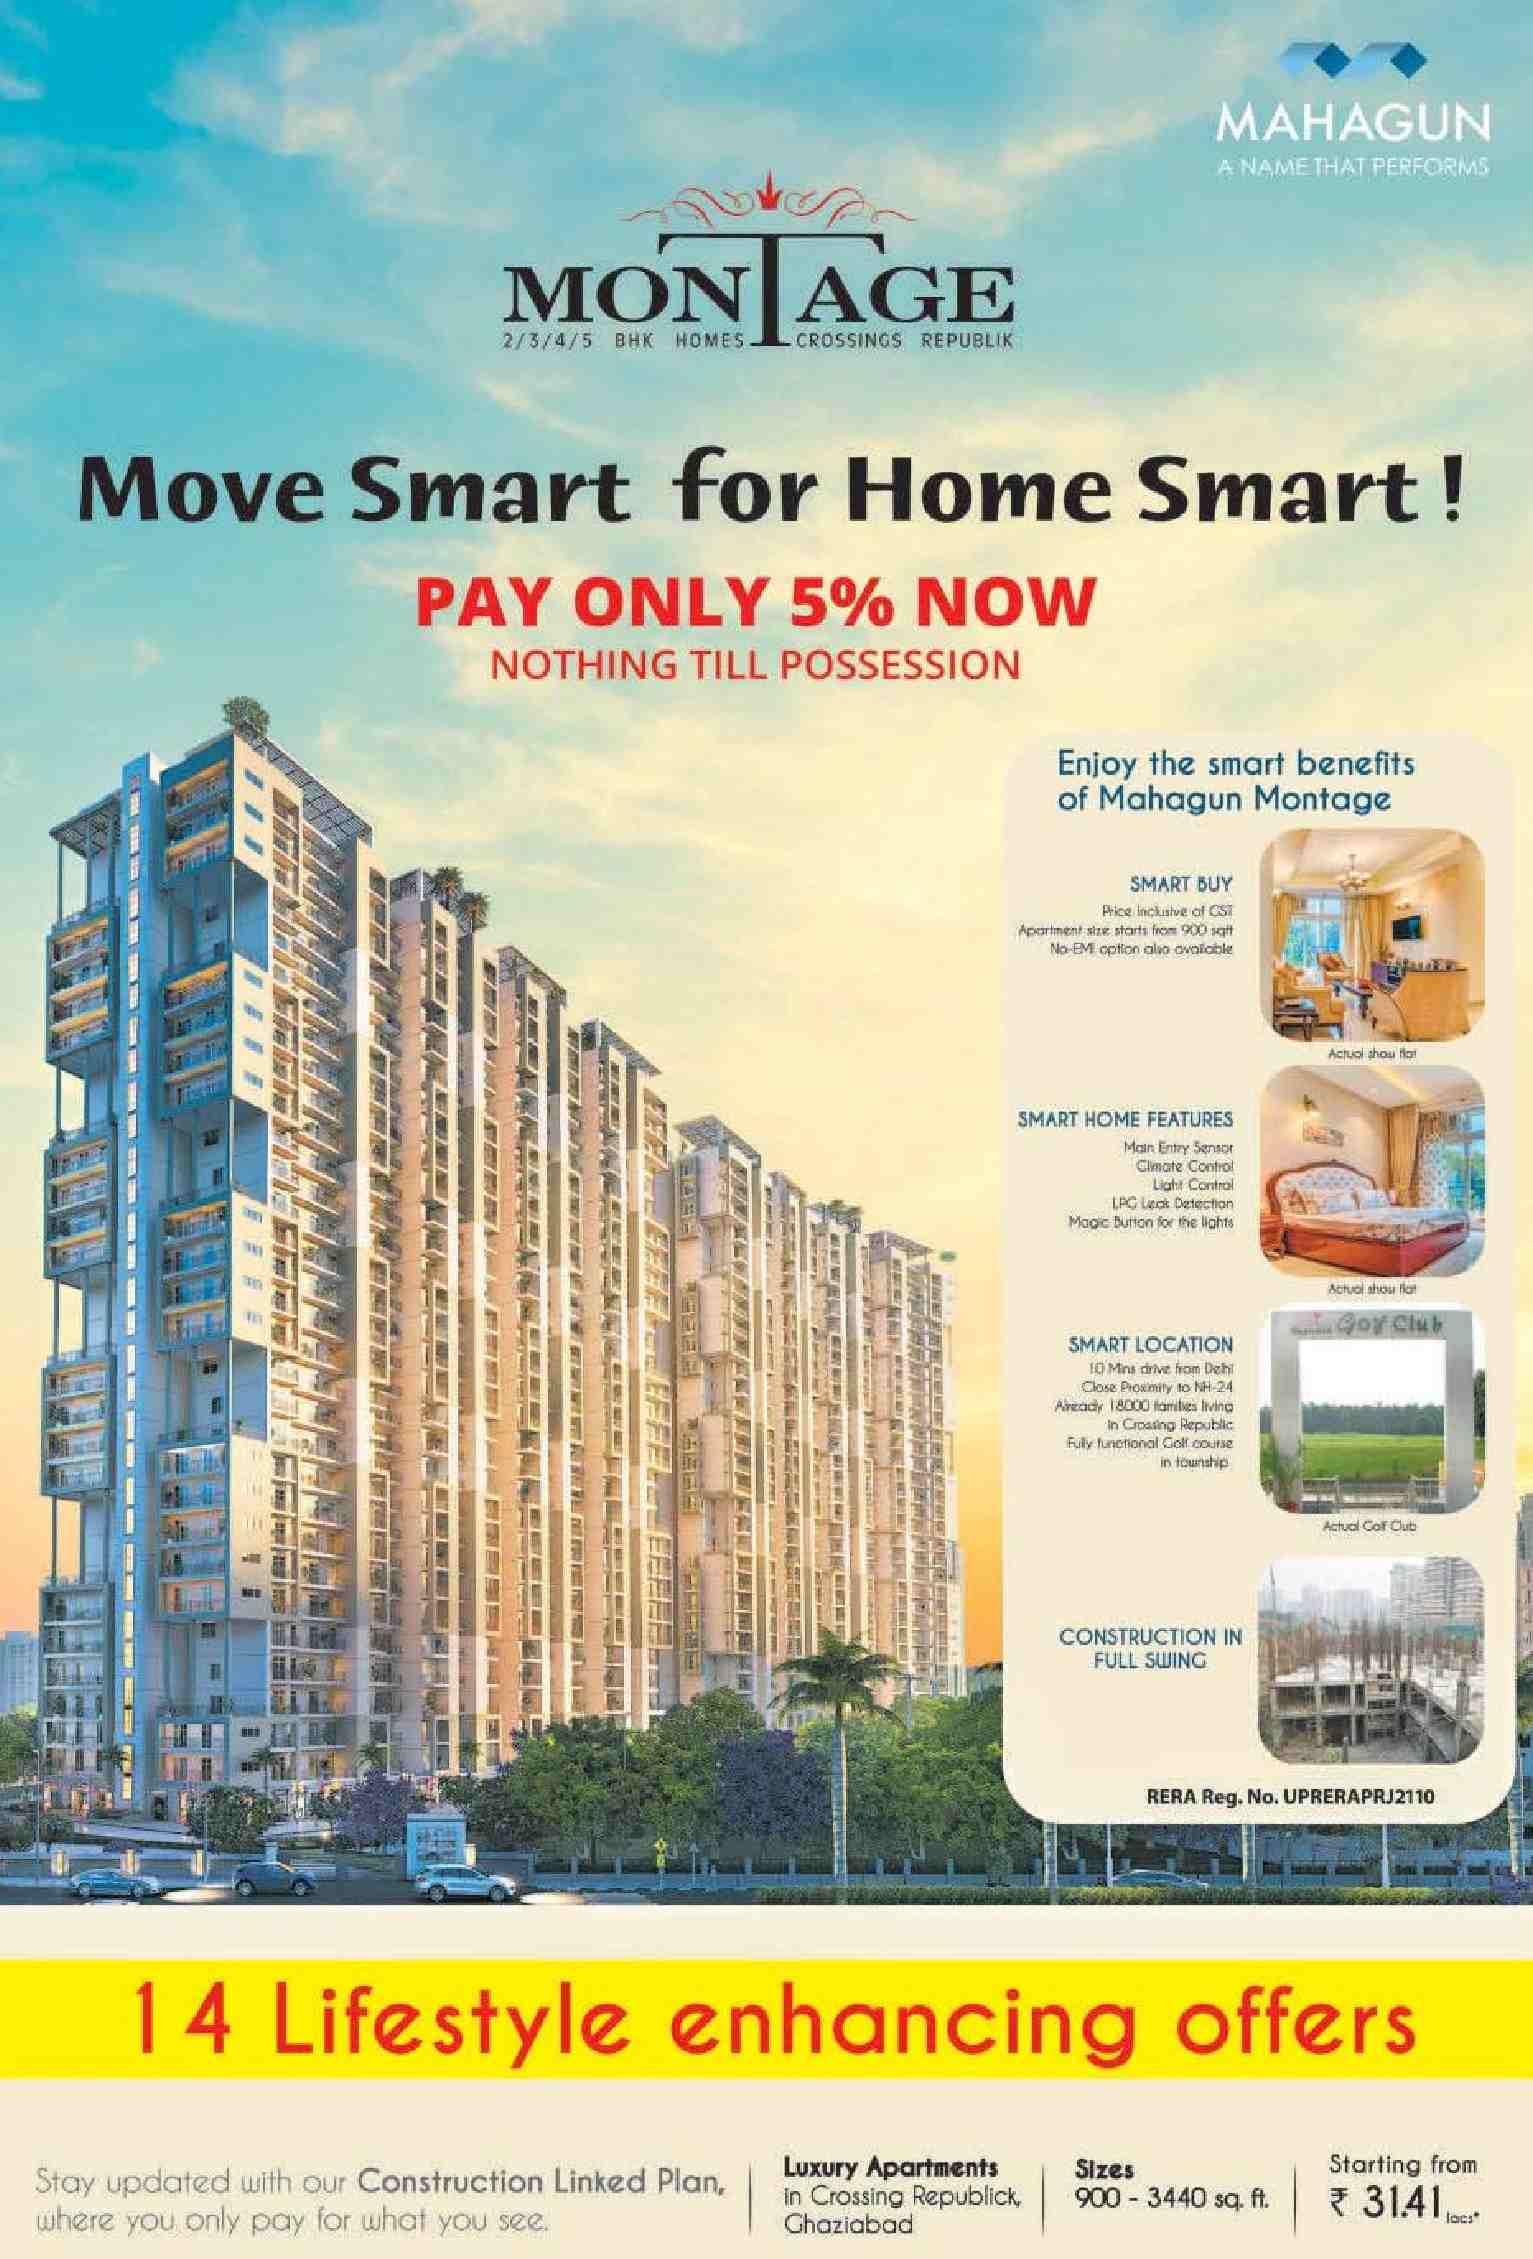 Pay only 5% now and nothing till possession at Mahagun Montage in Ghaziabad Update